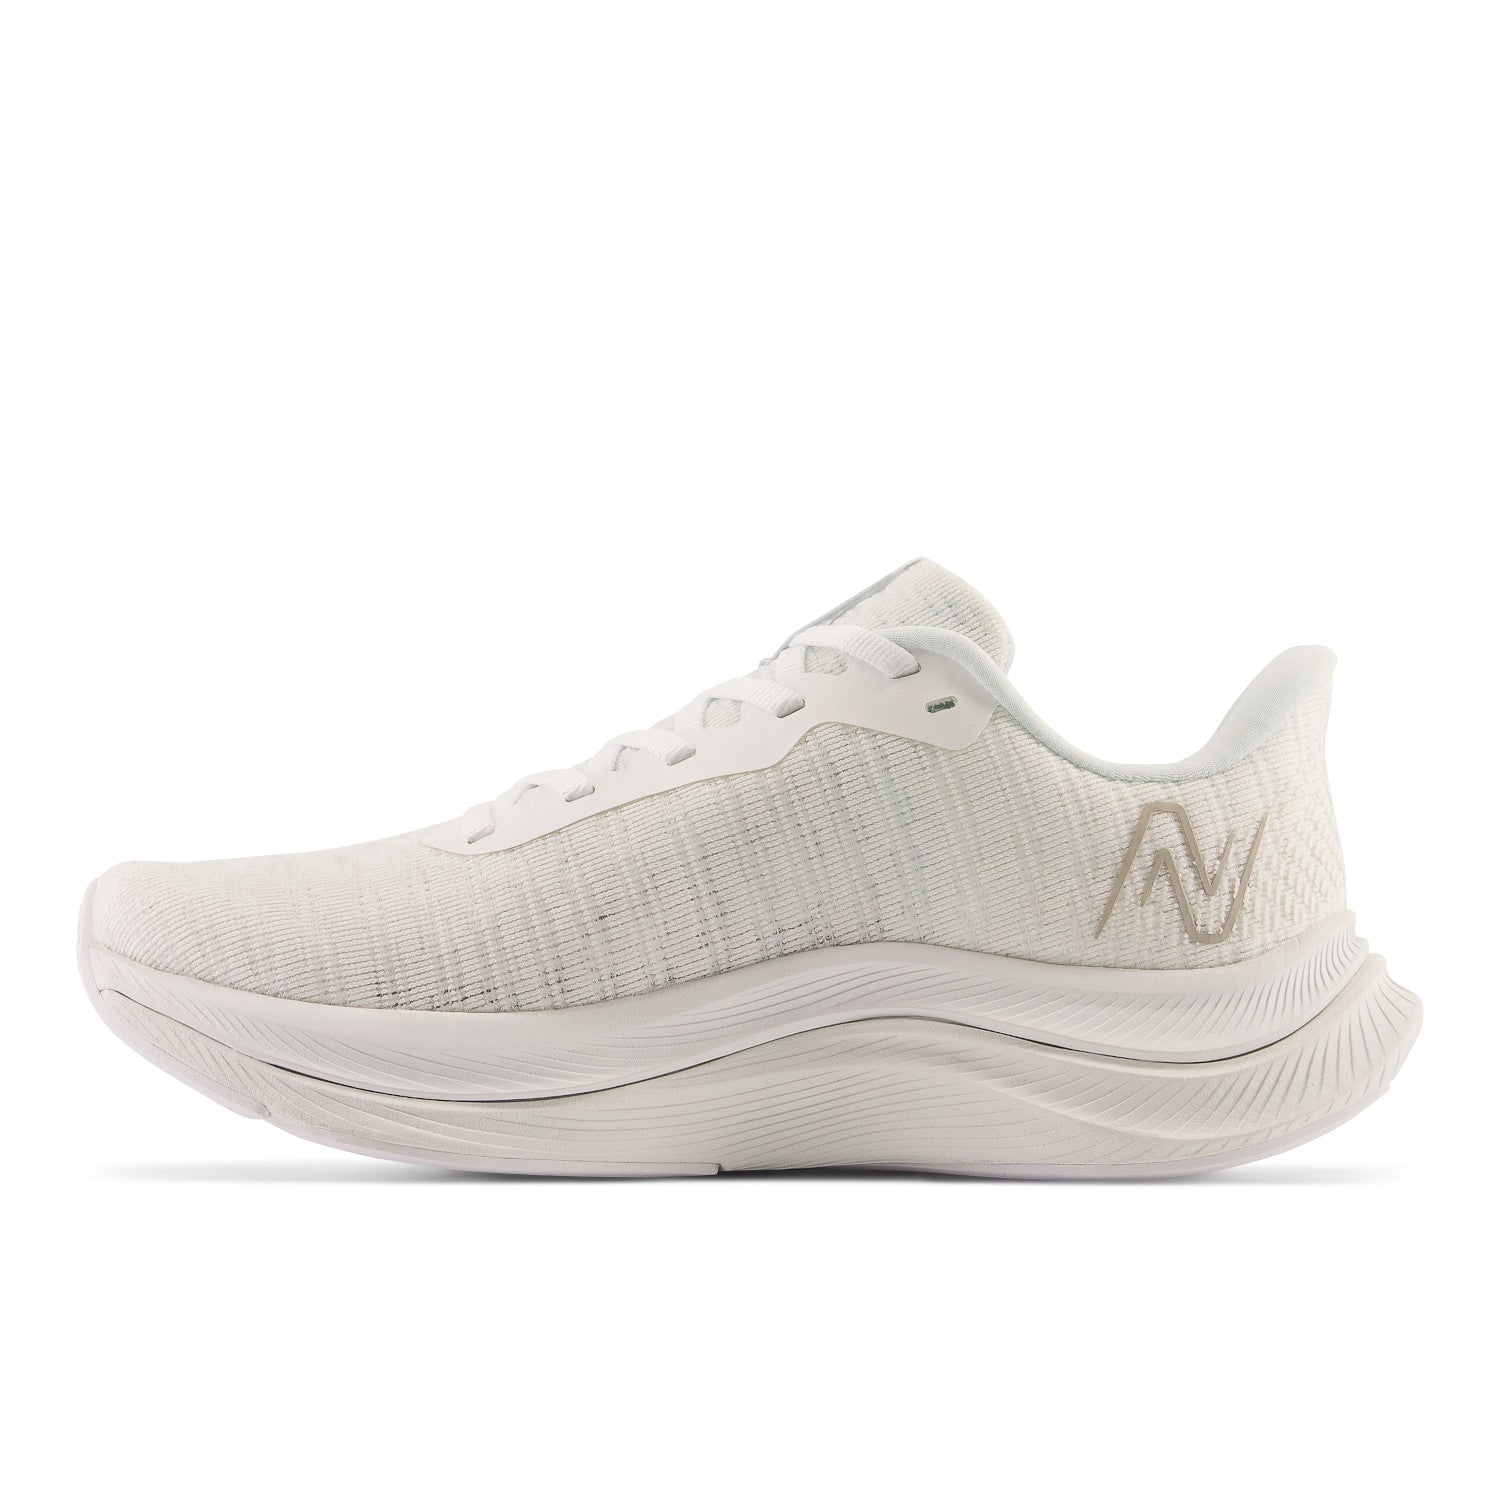 New Balance FuelCell Propel WFCPRLW4 Women's 3